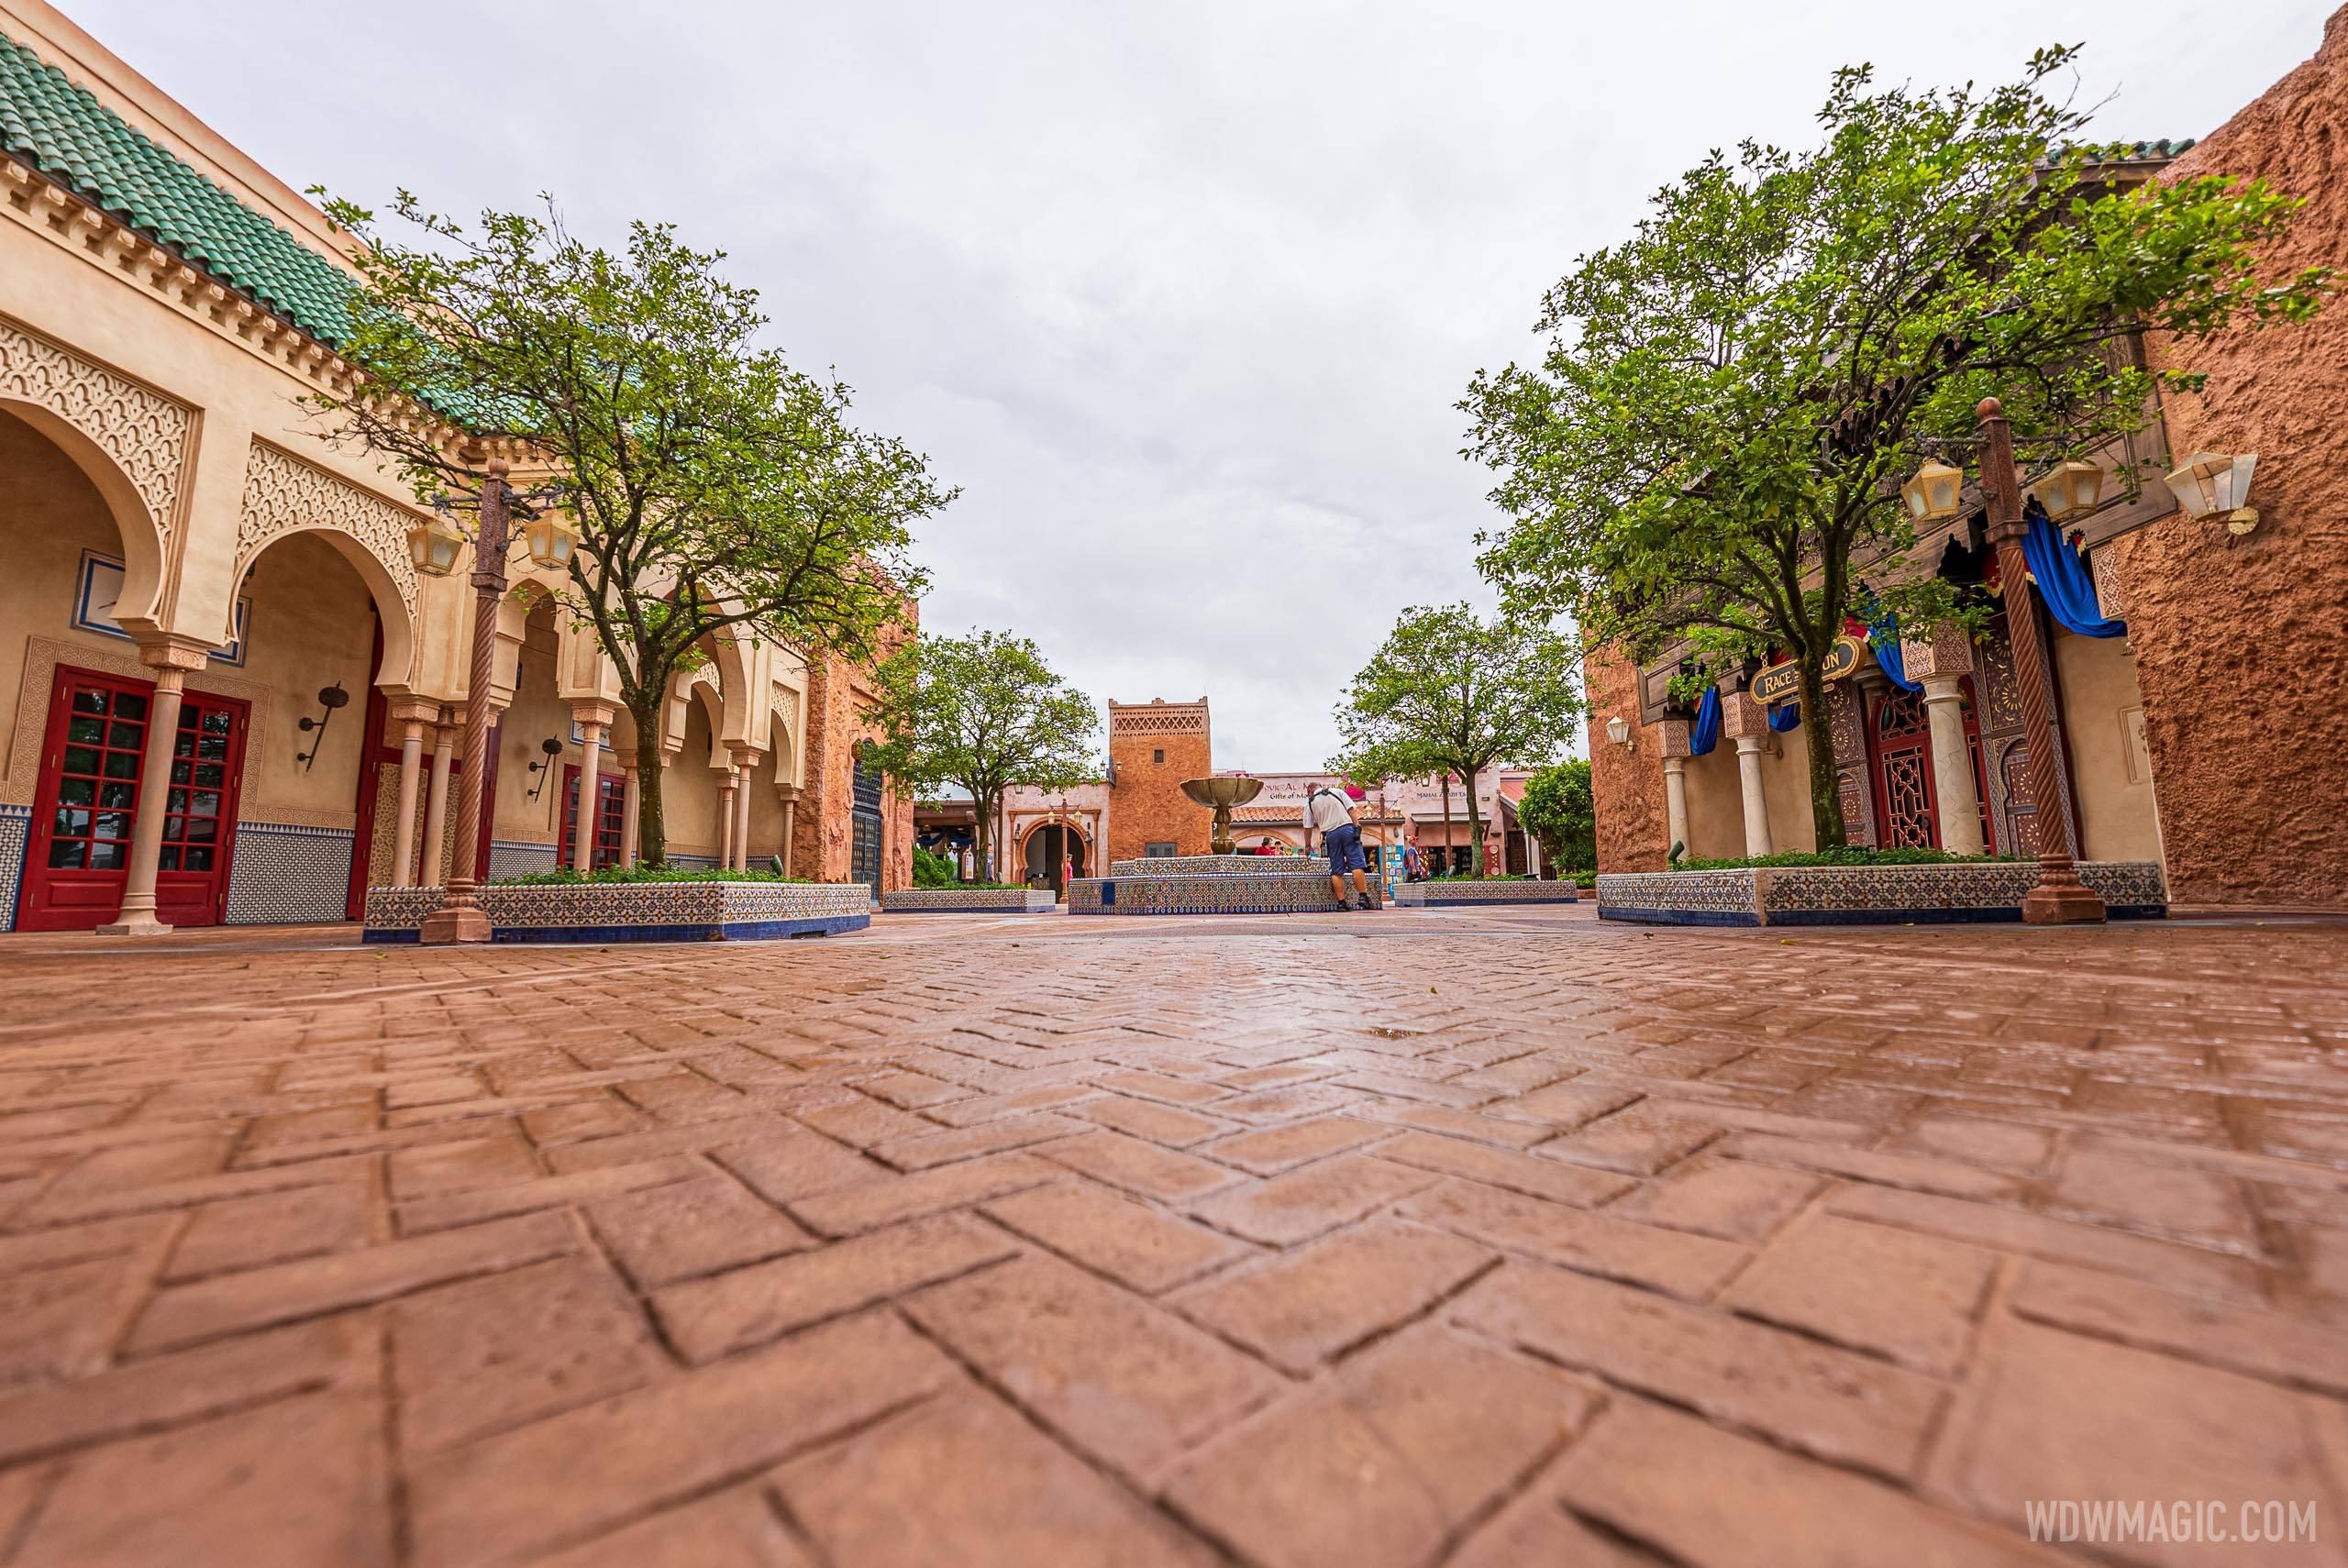 Morocco pavilion central courtyard reopens - July 6 2021